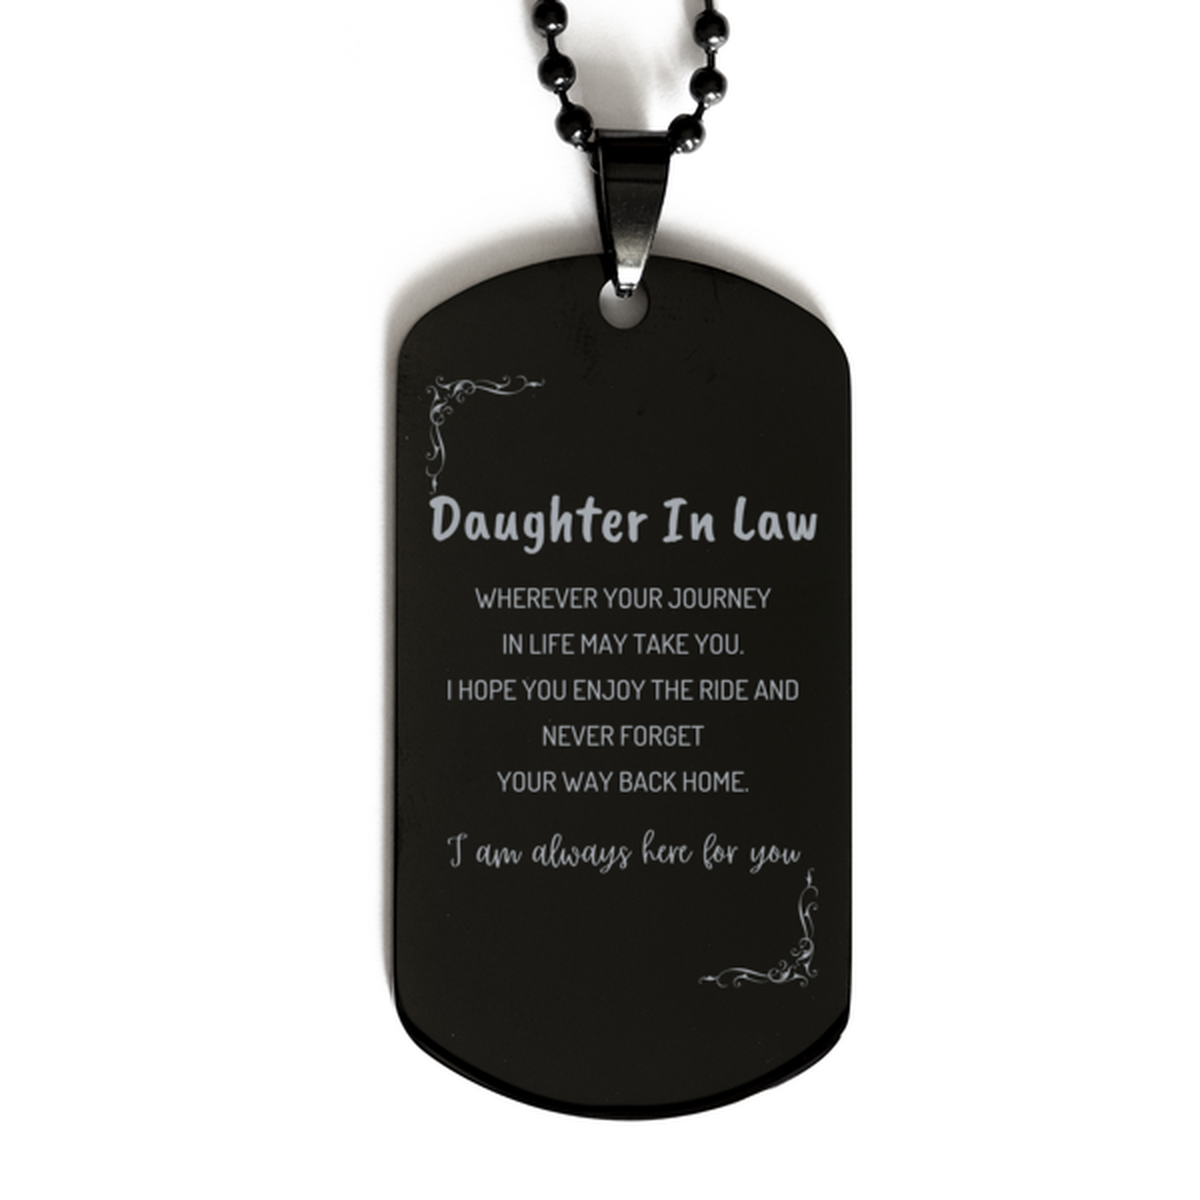 Daughter In Law wherever your journey in life may take you, I am always here for you Daughter In Law Black Dog Tag, Awesome Christmas Gifts For Daughter In Law, Daughter In Law Birthday Gifts for Men Women Family Loved One